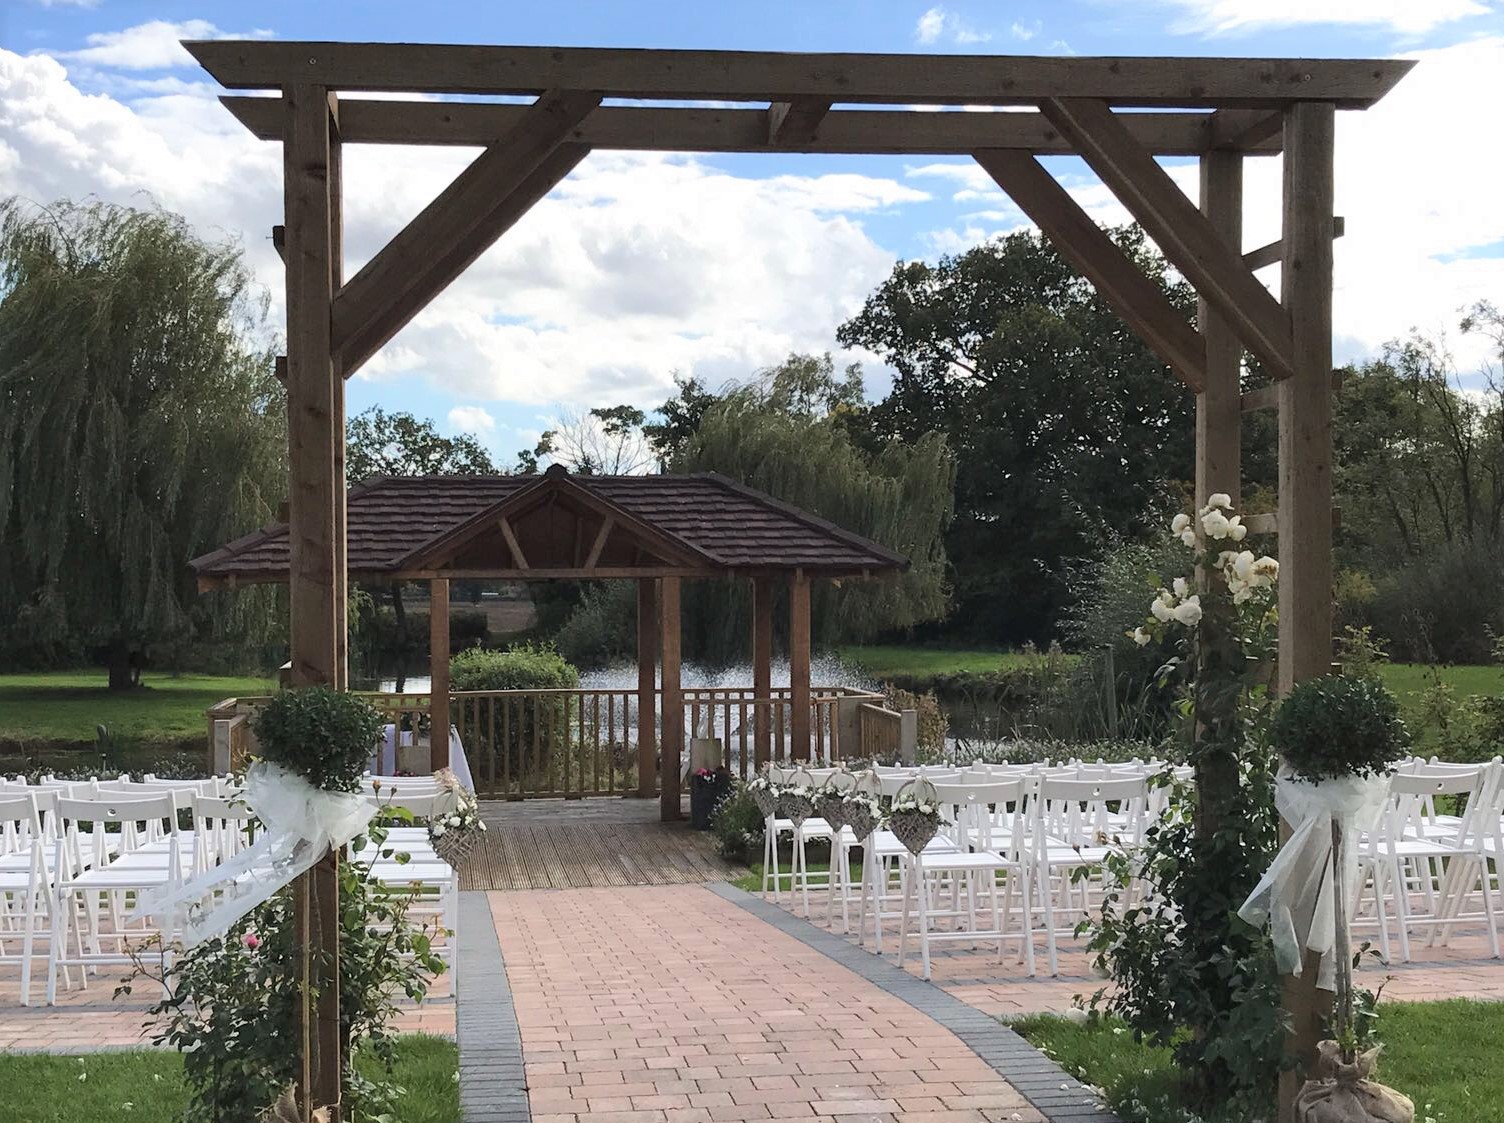 wootton park gyp wicker baskets down aisle Swags on arch rustic look aisle outside weddings Wootton  Park